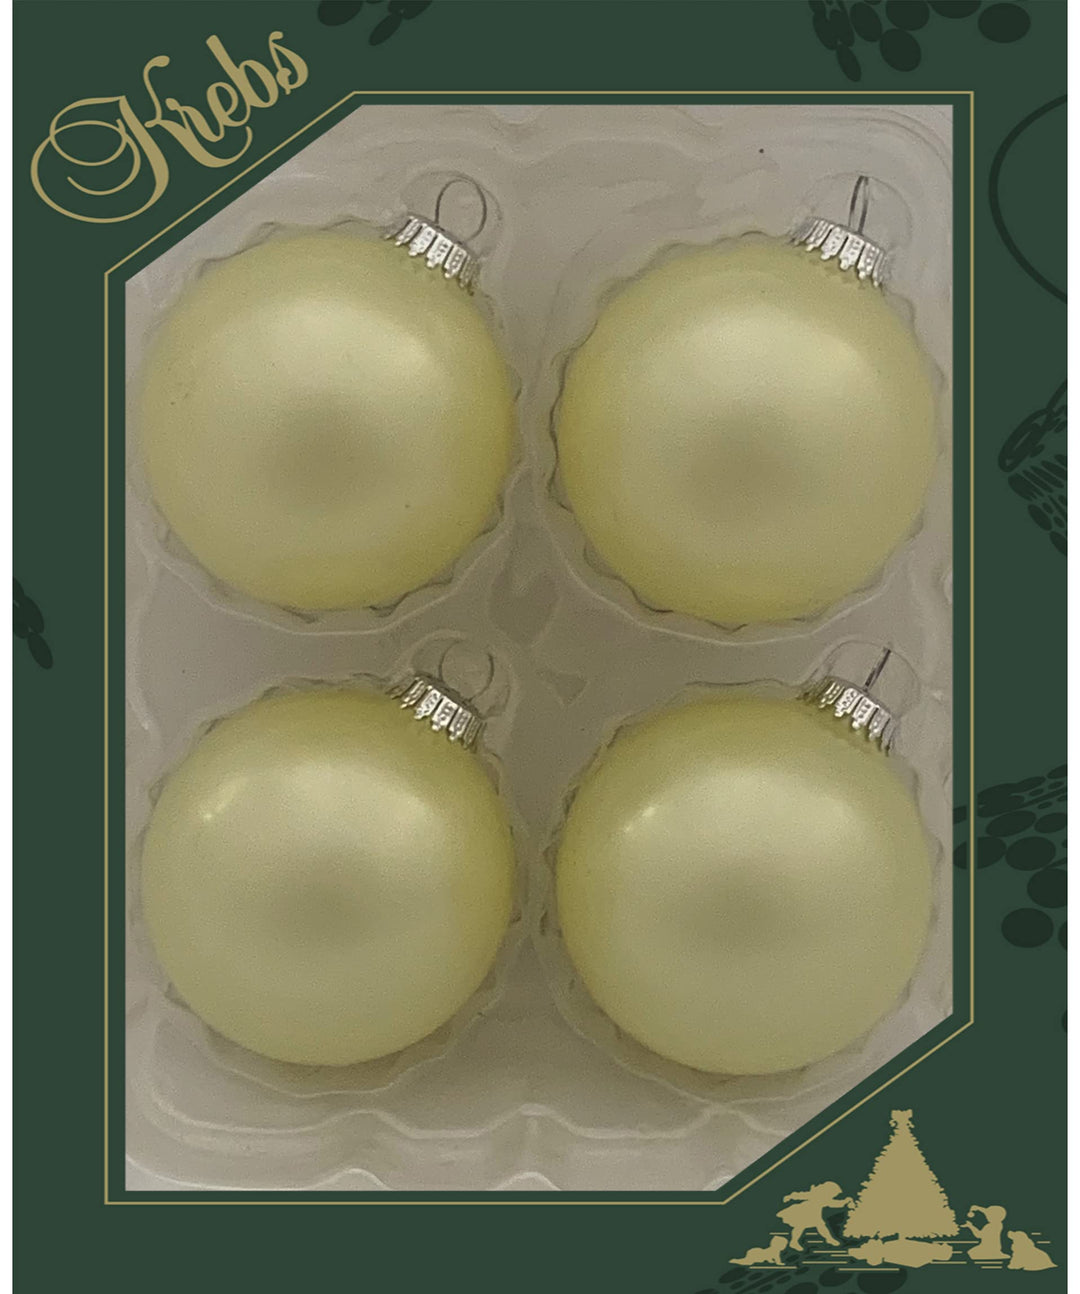 Glass Christmas Tree Ornaments - 80mm / 3.25" [4 Pieces] Designer Balls from Christmas By Krebs Seamless Hanging Holiday Decor (Blonde)